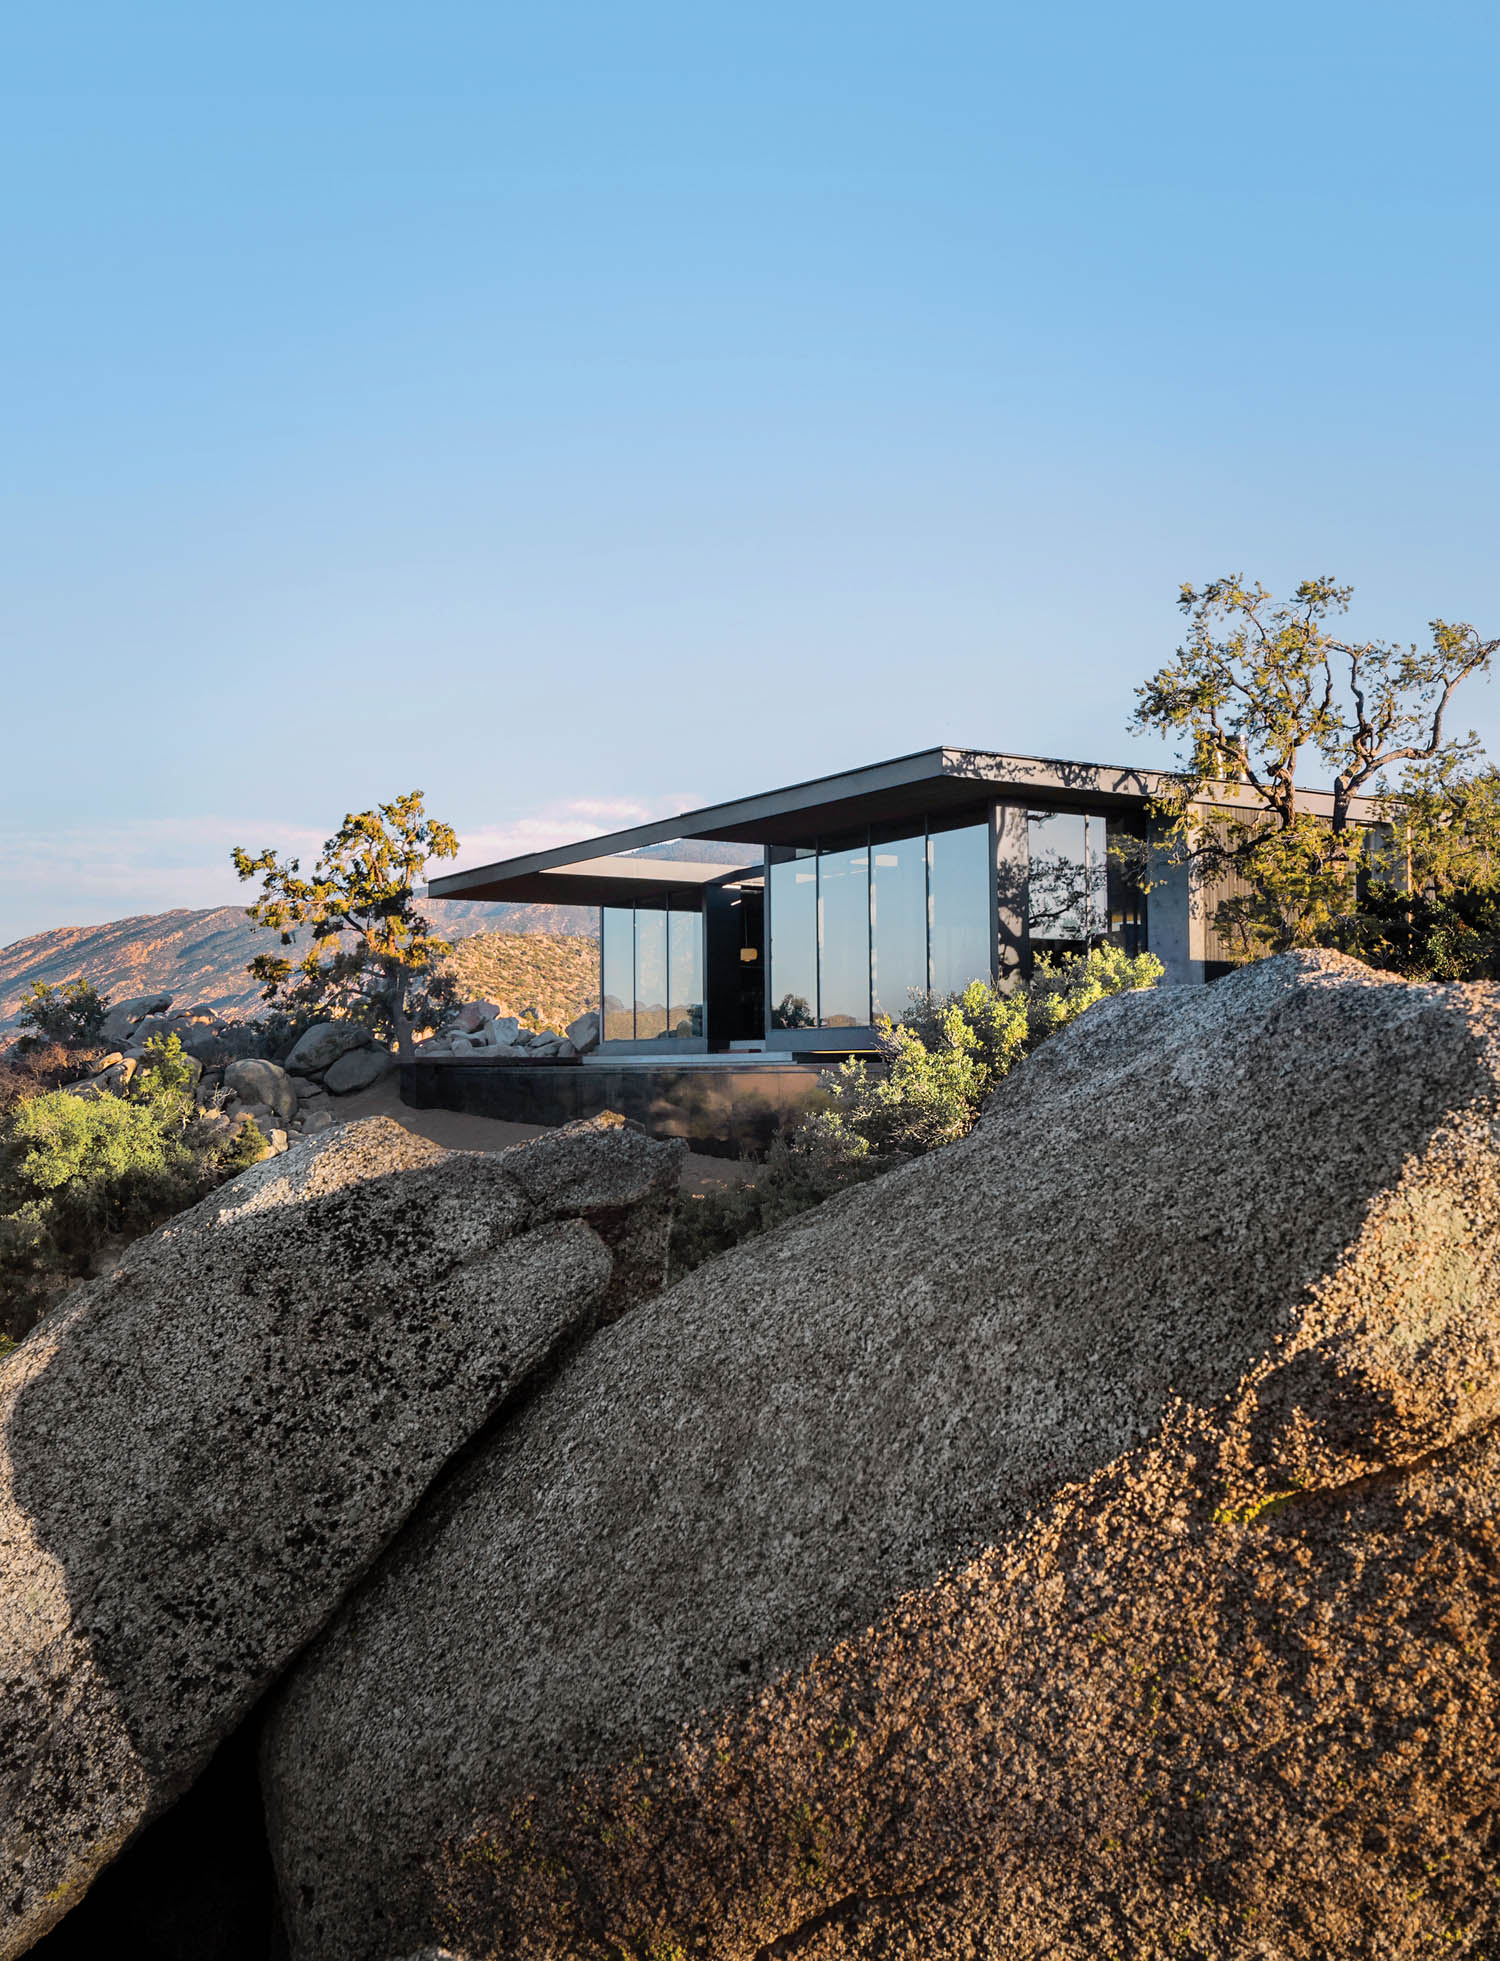 A house nestled amid boulders on a plateau in Palm Desert, California